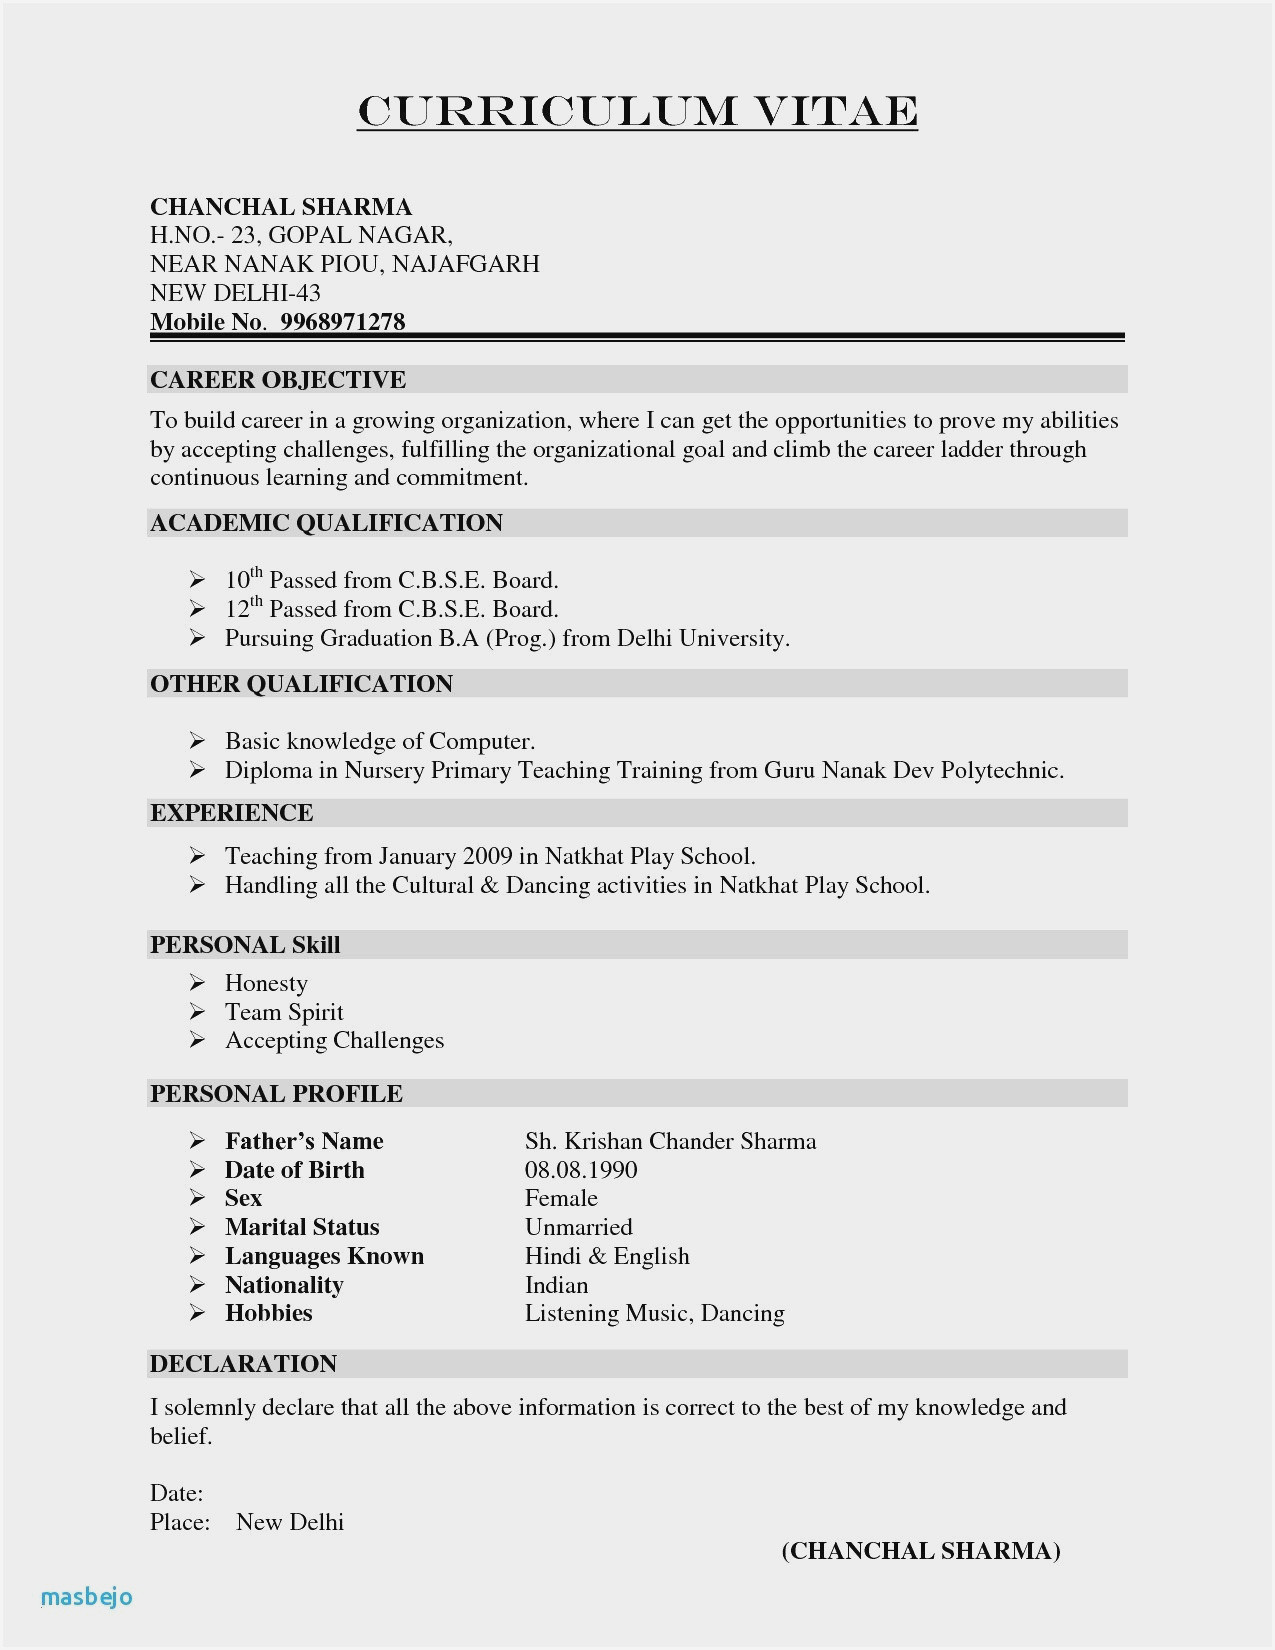 Resume Samples for Mba Freshers Free Download Sample Resume format for Freshers Download Fre